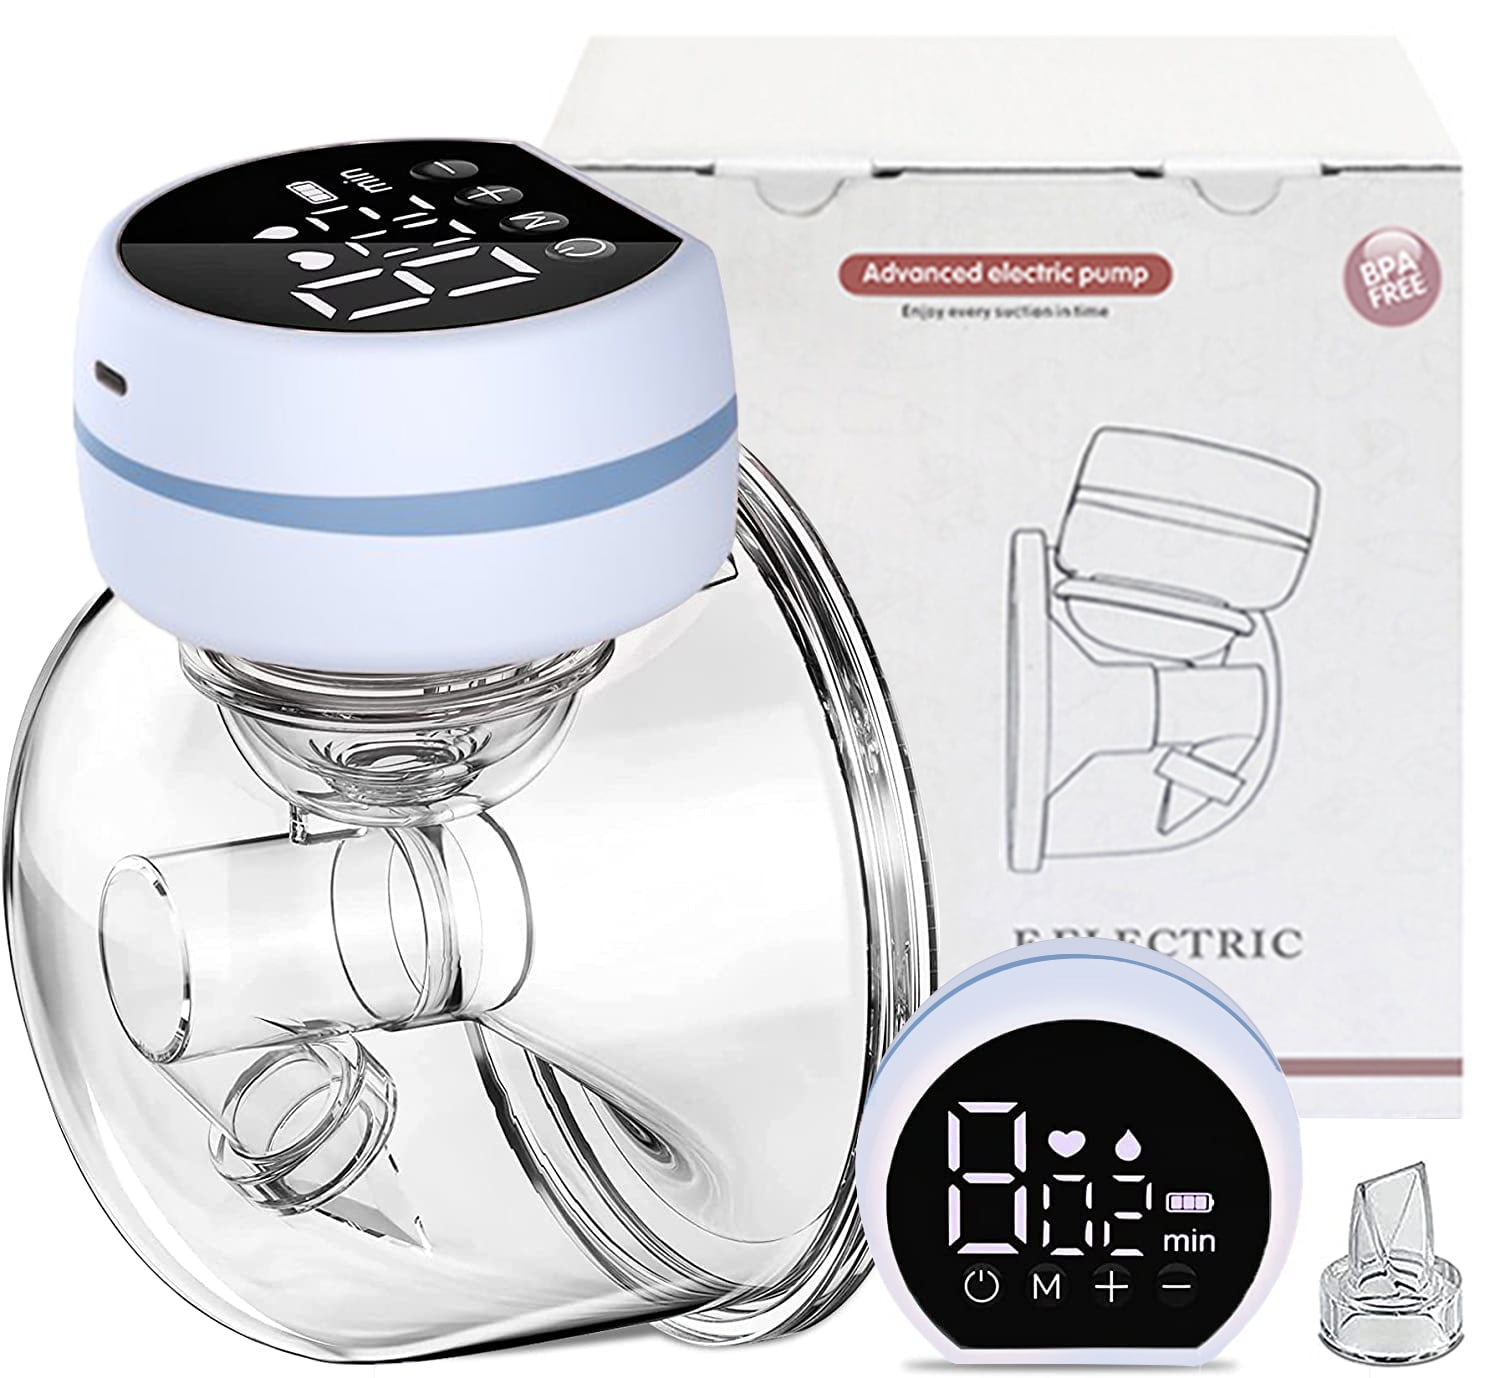 Palmatte Wearable Breast Pump Hands Free Portable & Wireless, Leakproof  Painless Electric Breast Pump 3 Modes 9 Levels LED Display Remote & Storage